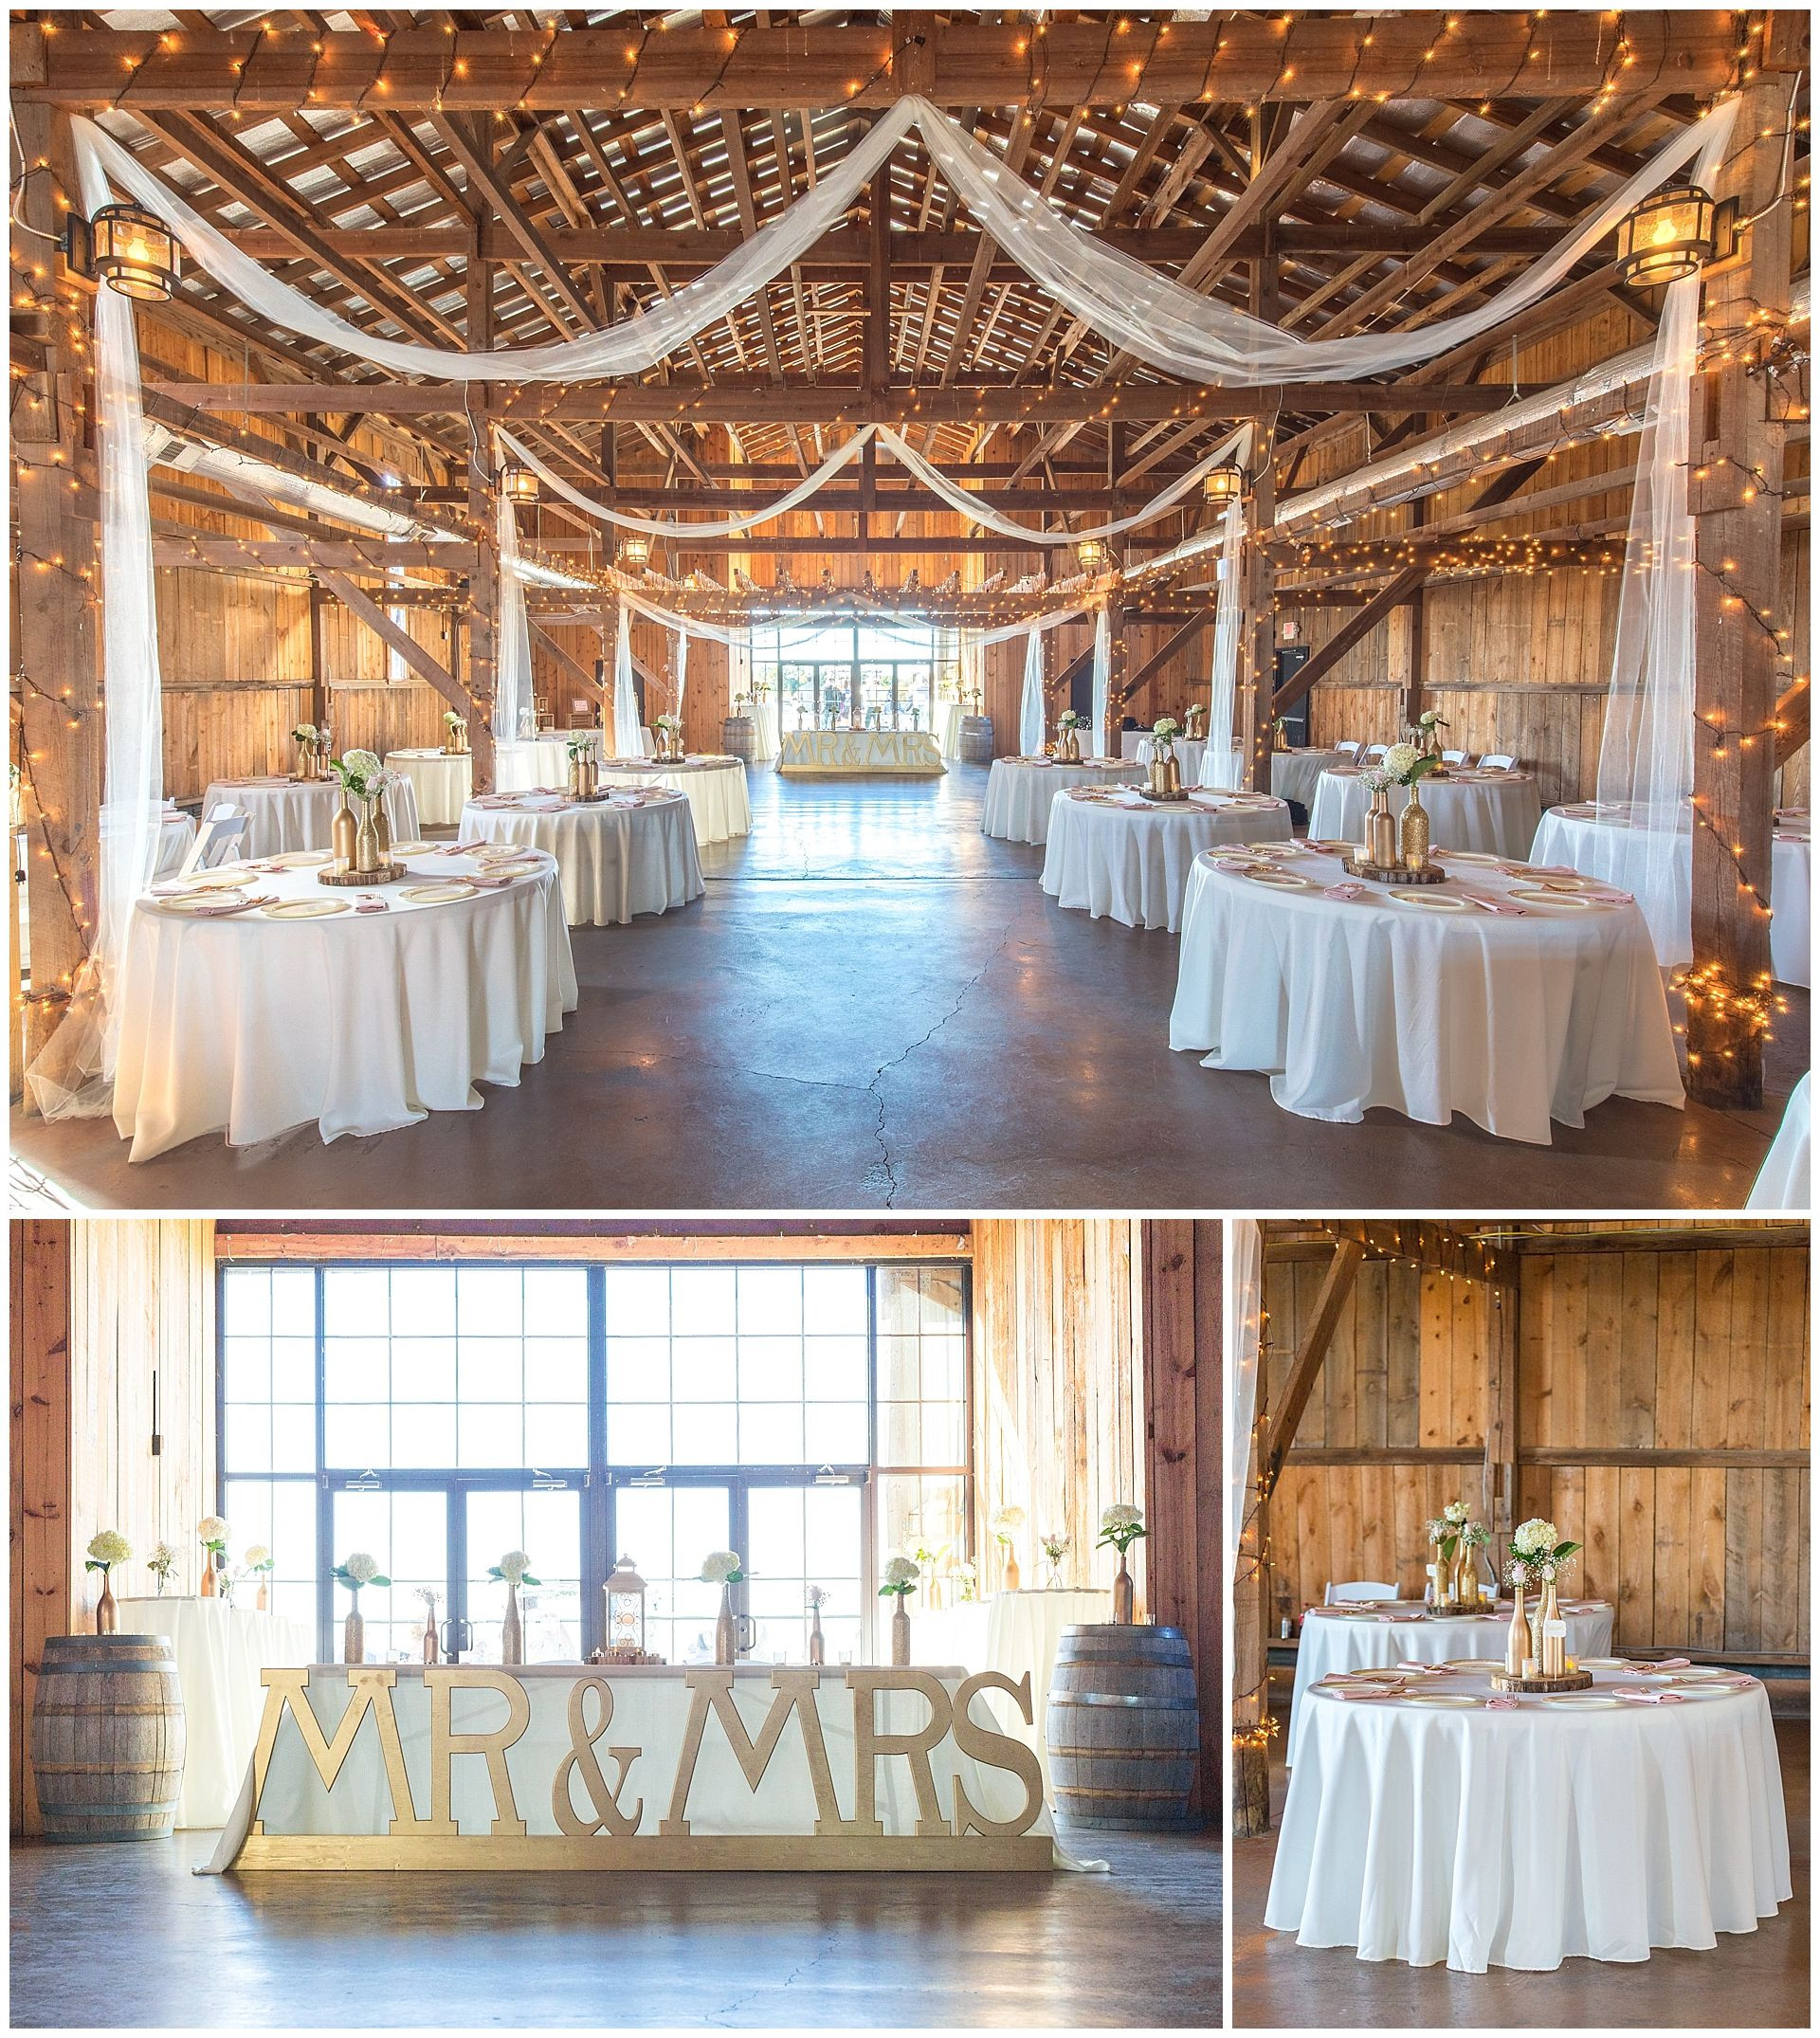 Wedding Venues In Lexington Ky
 Talon Winery Weddings and Events Based in Lexington